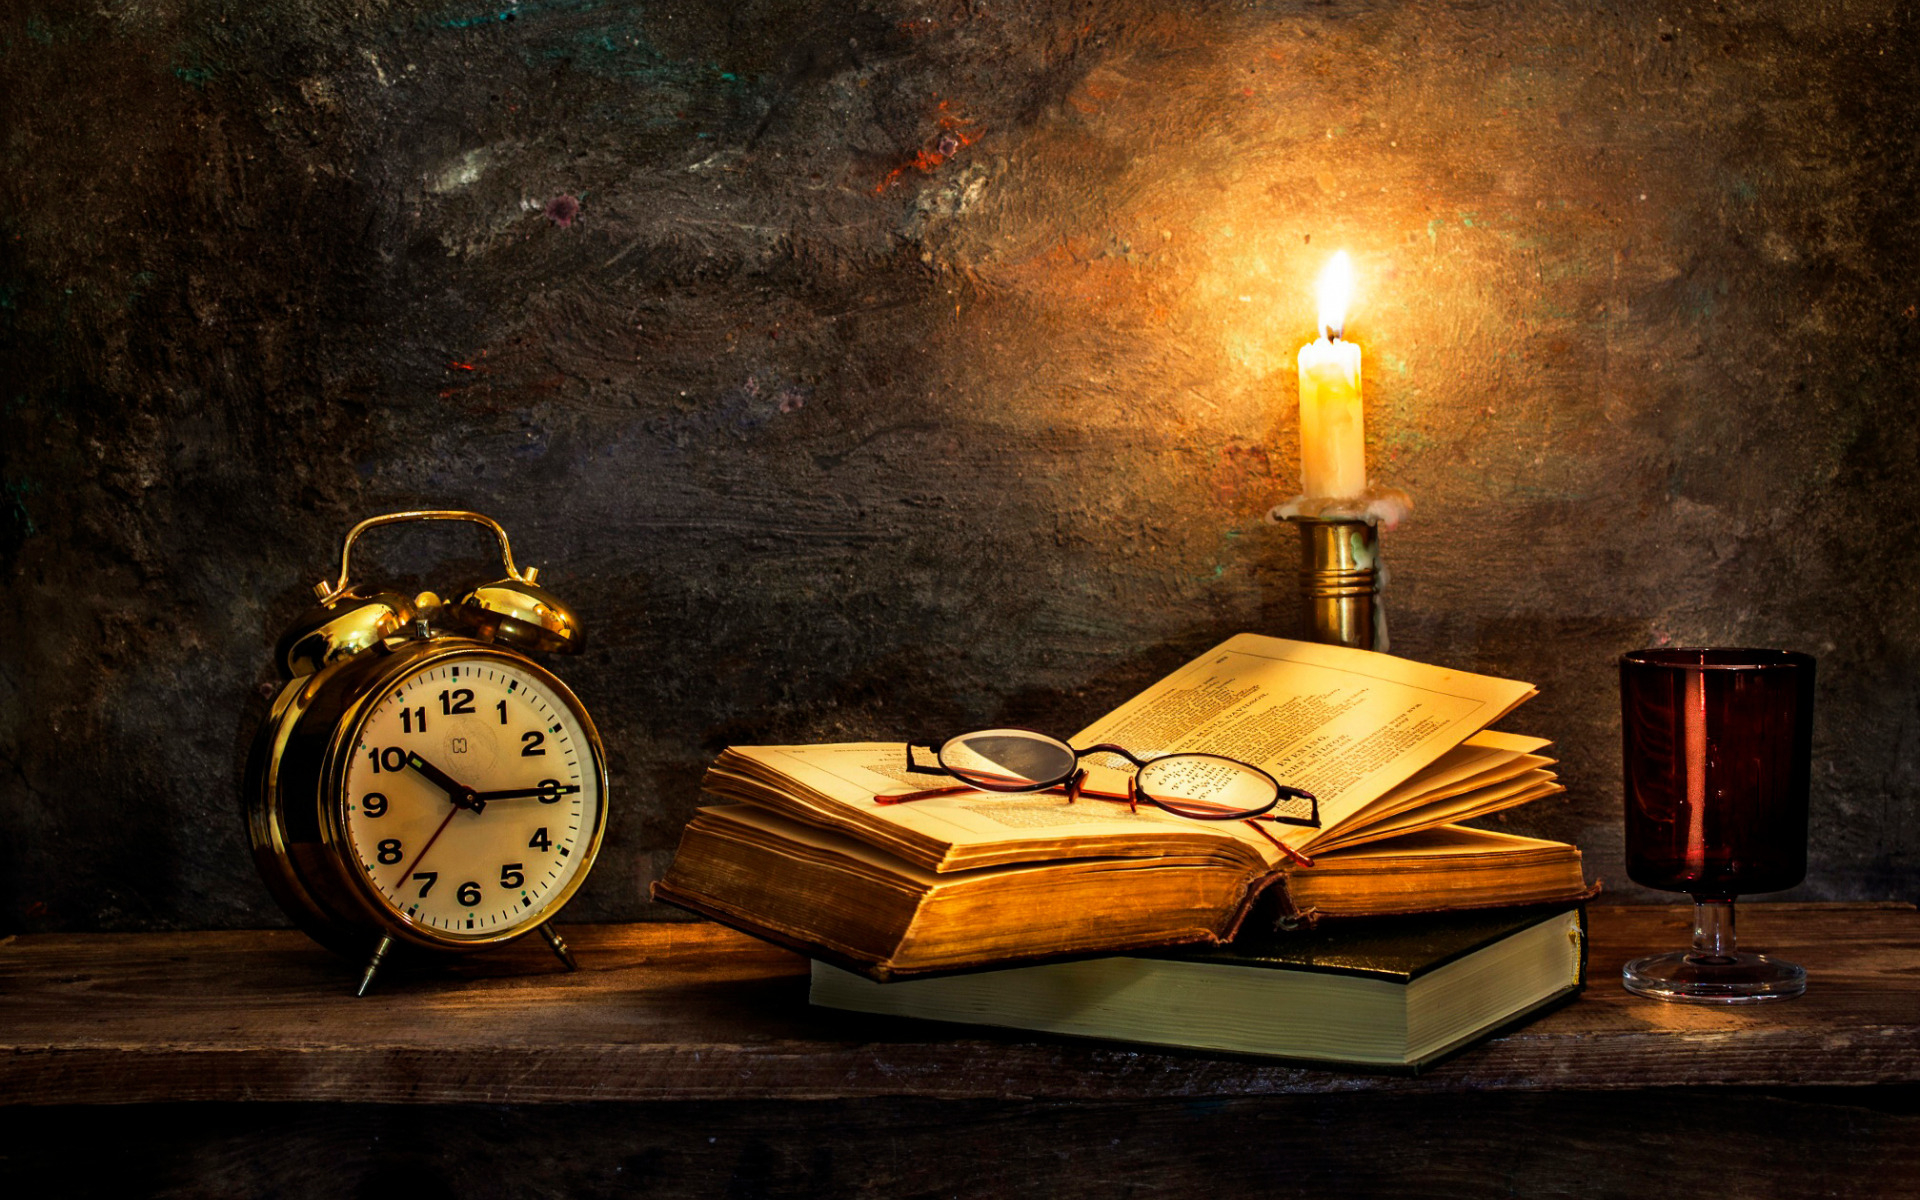 1920x1200 Download wallpaper watch, candle, old books, Time to turn in, section style in resoluti